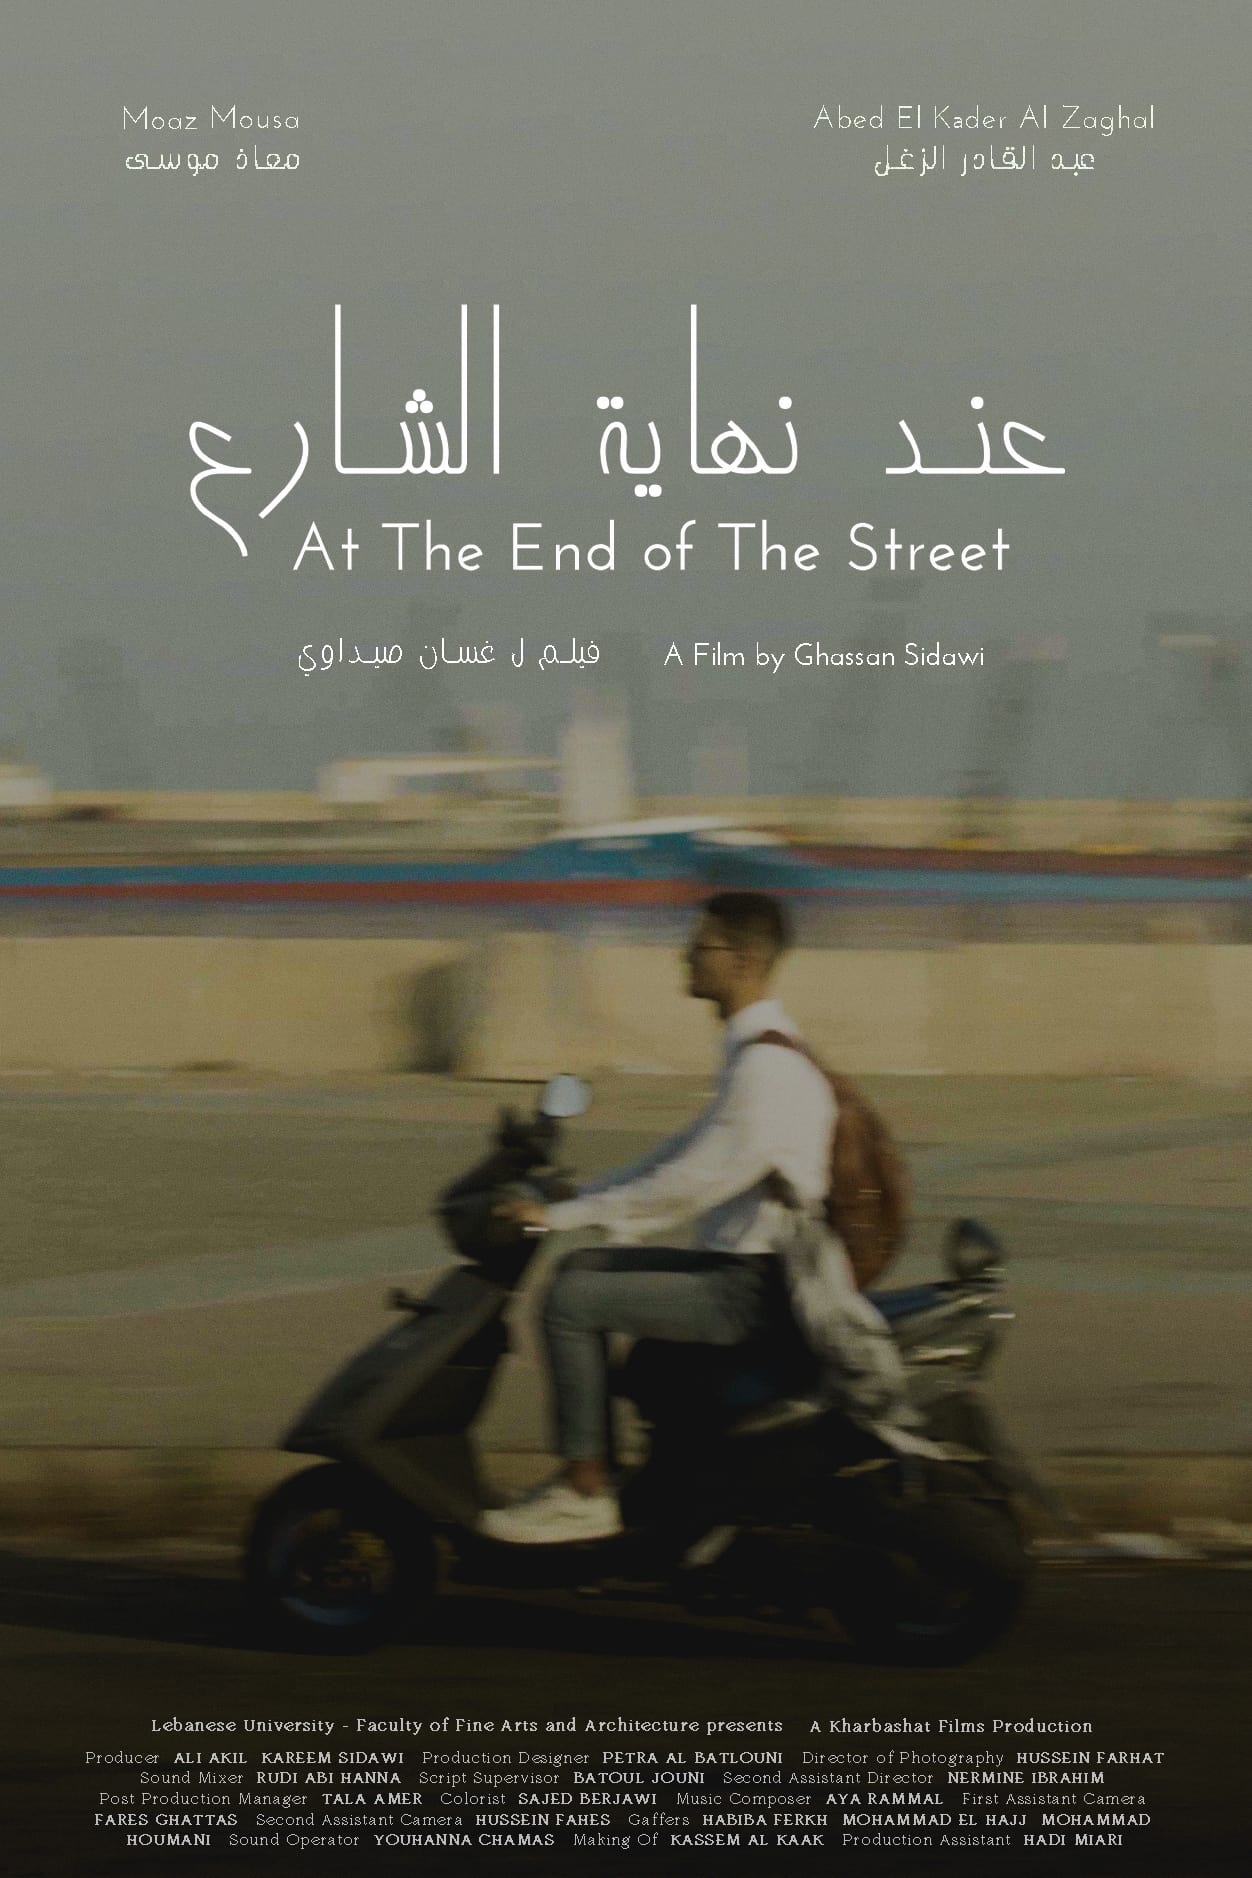 At The End of The Street